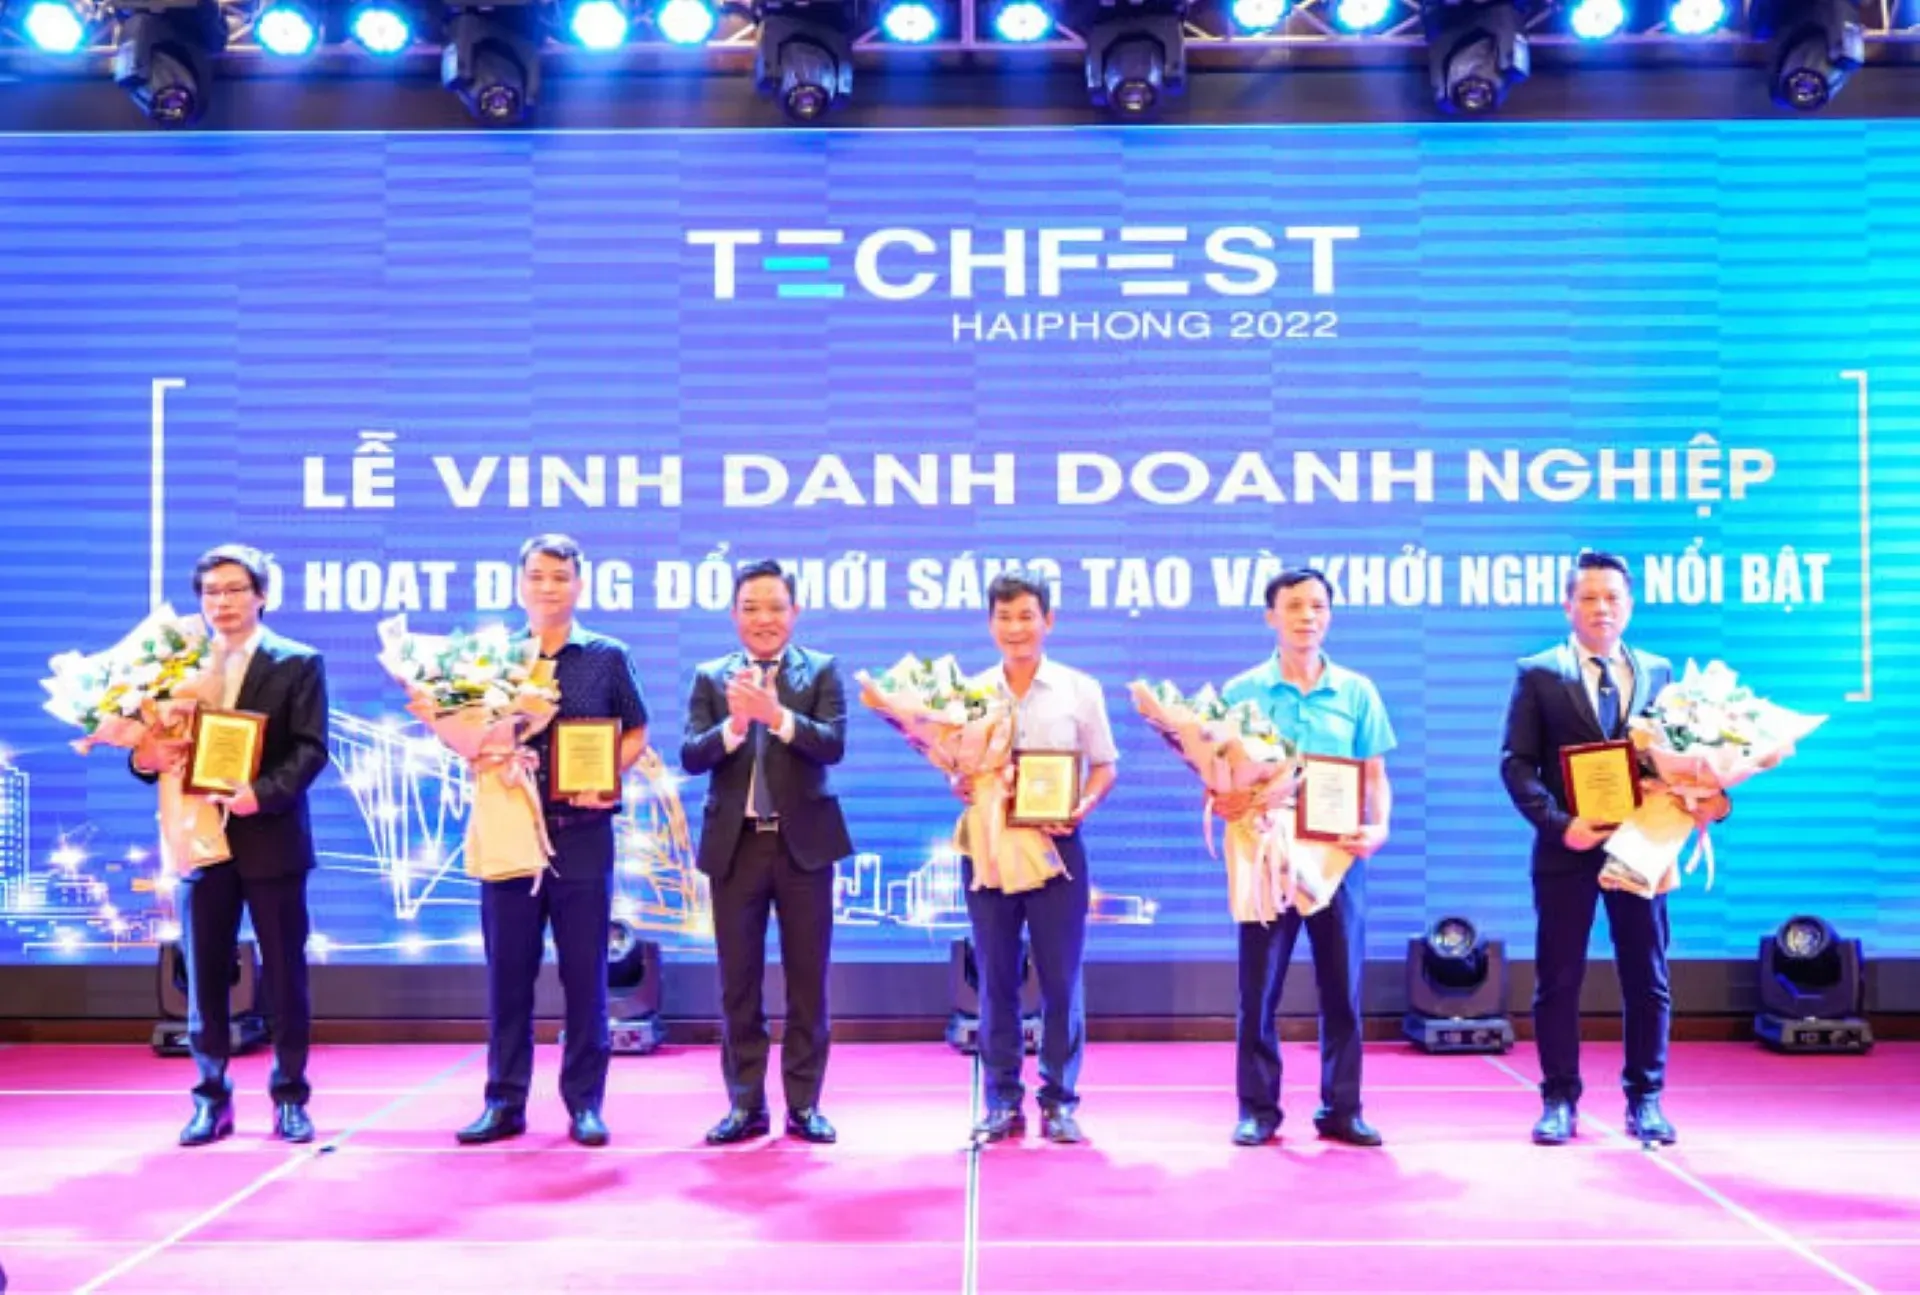 Viindoo has been awarded as Technology Science Enterprise of Hai Phong